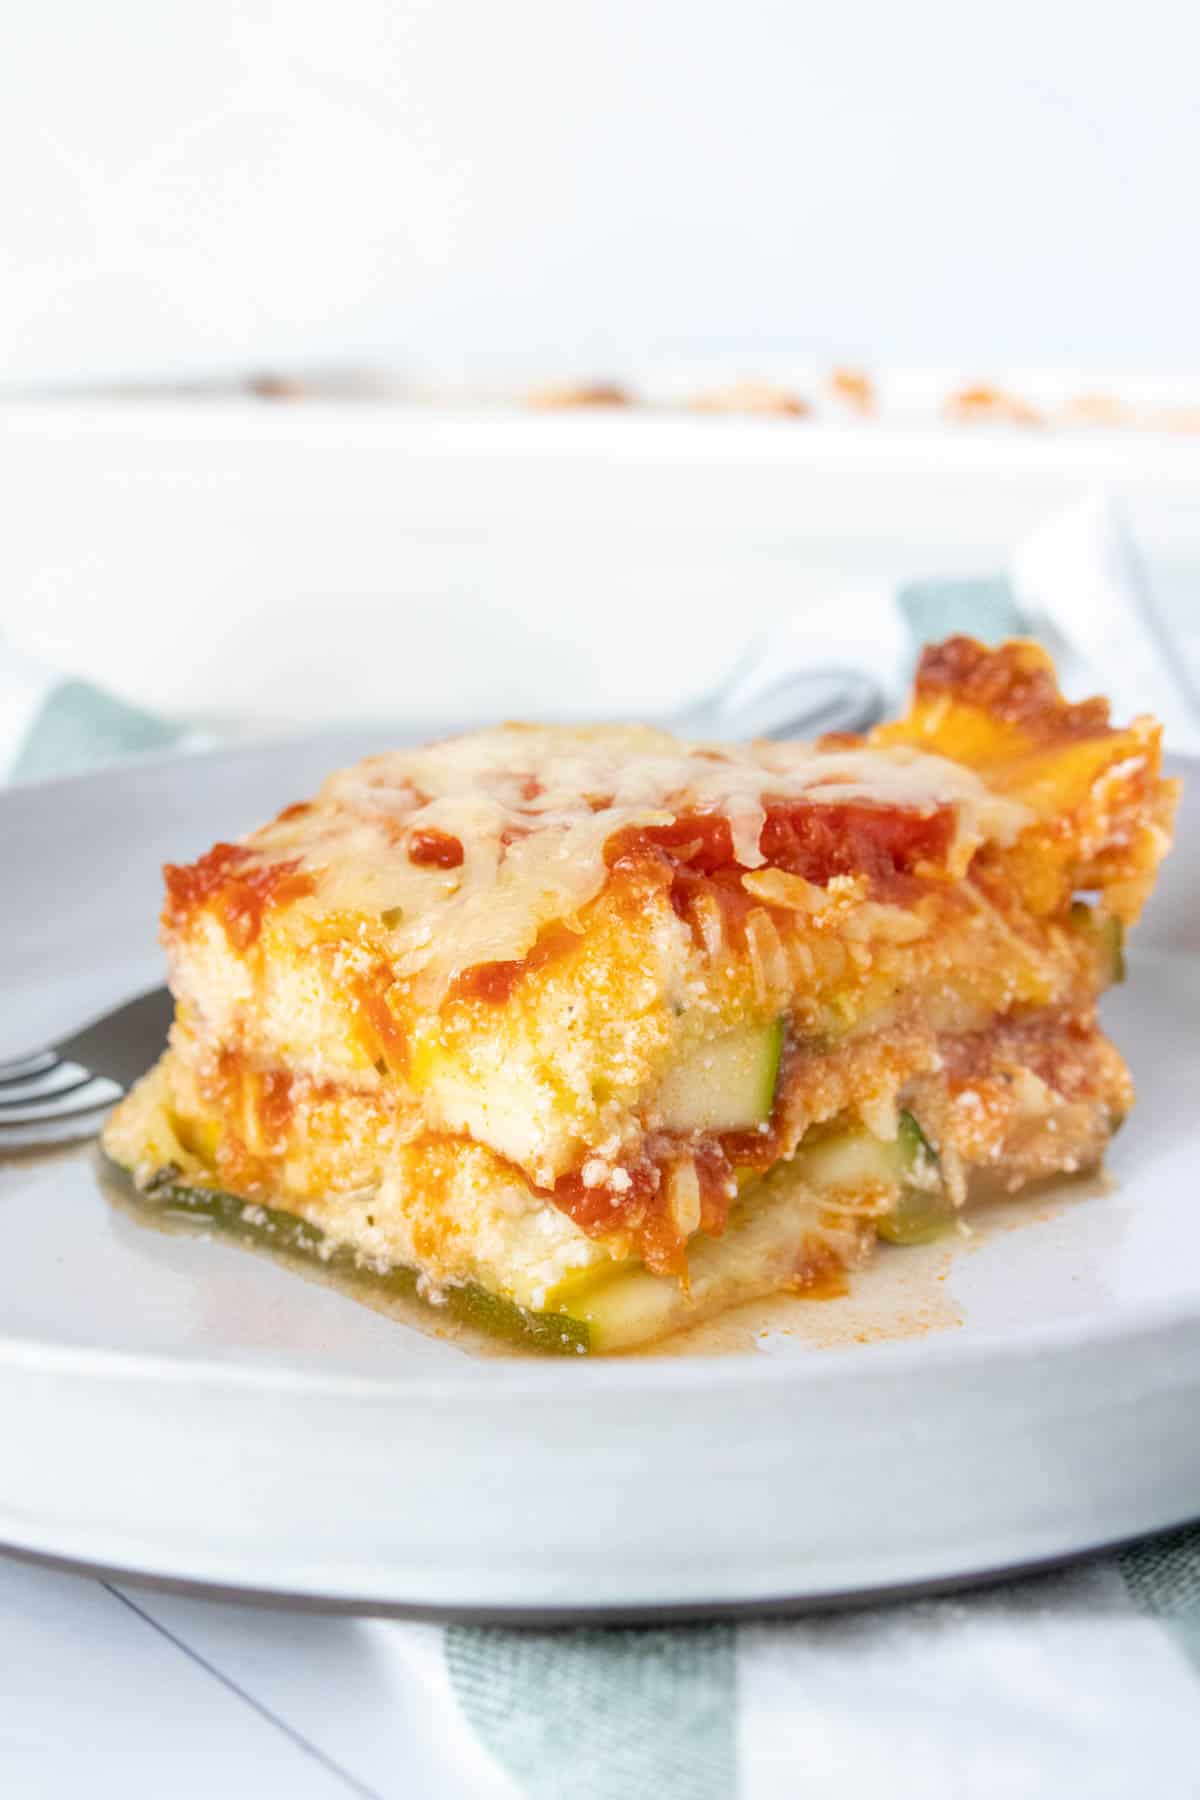 Slice of zucchini lasagna on a gray plate from the side.